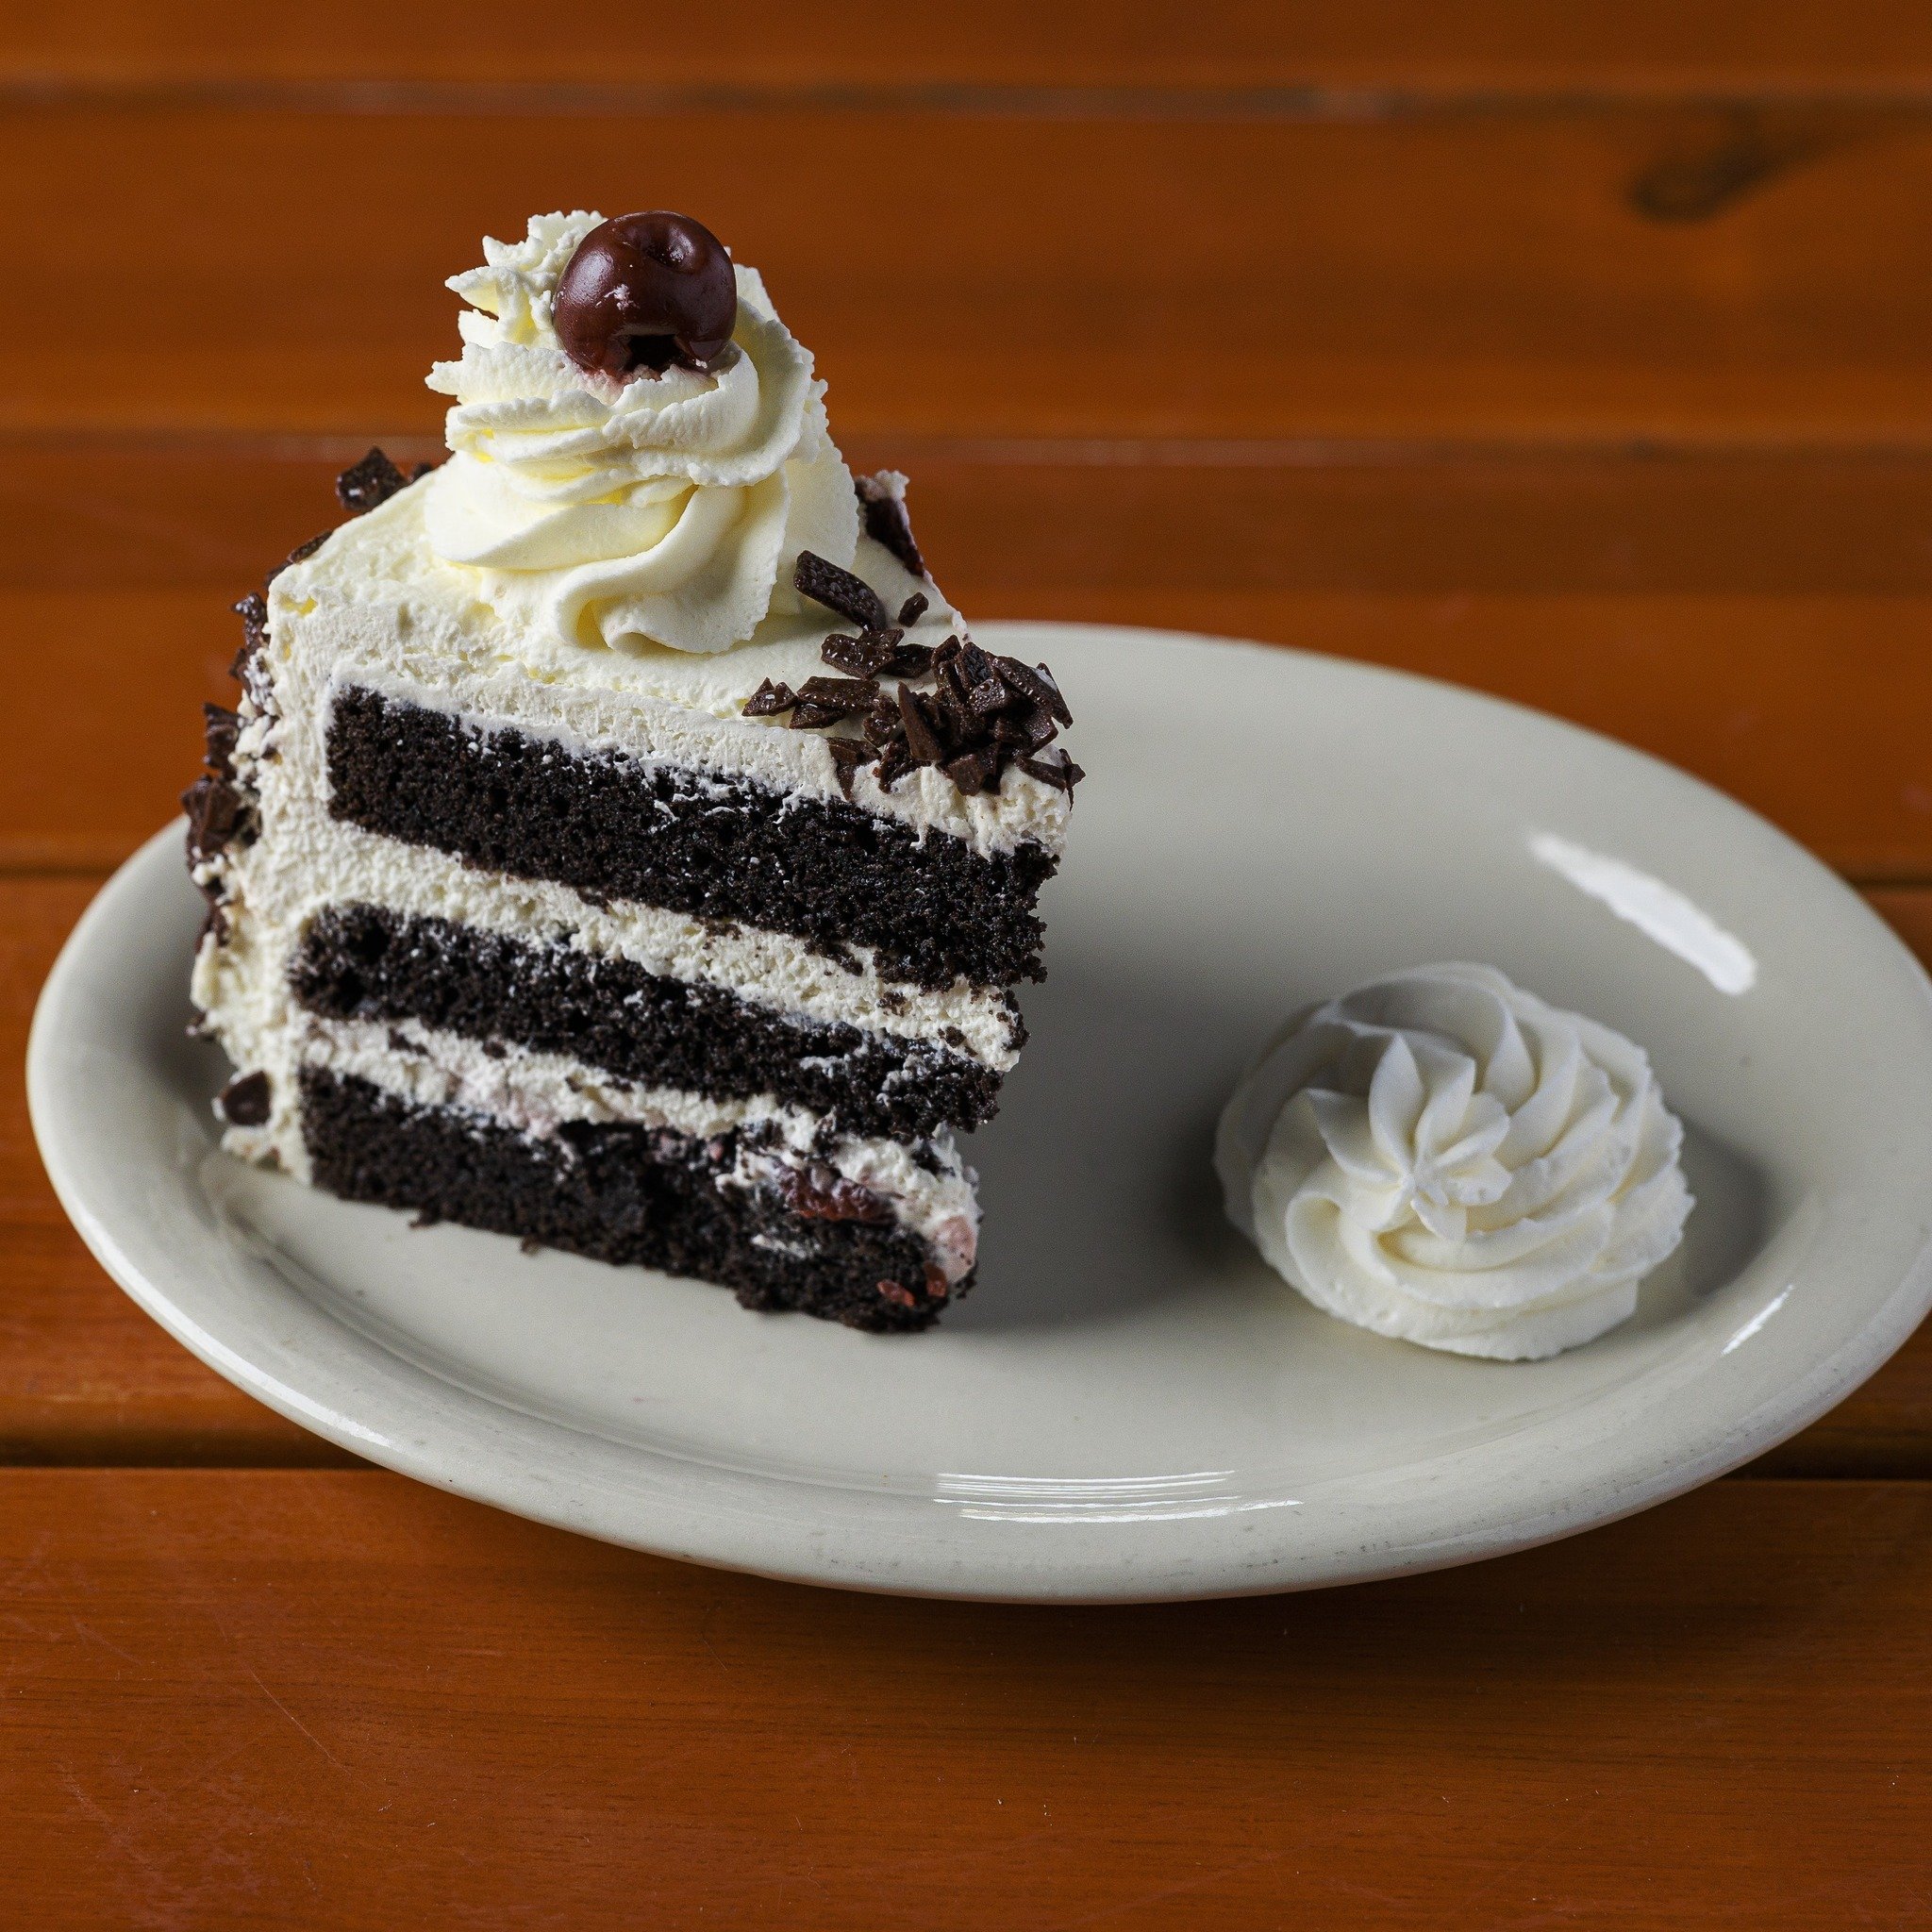 𝐒𝐜𝐡𝐰𝐚𝐫𝐳𝐰𝐚̈𝐥𝐝𝐞𝐫 𝐊𝐢𝐫𝐬𝐜𝐡𝐭𝐨𝐫𝐭𝐞!
Hollerbach's Black Forest Cake is made by our own pastry chefs with decadent rich chocolate cake, homemade whipped cream, cherry baking Schnapps (Kirsch), dark cherries soaked in Kirsch, dark chocol